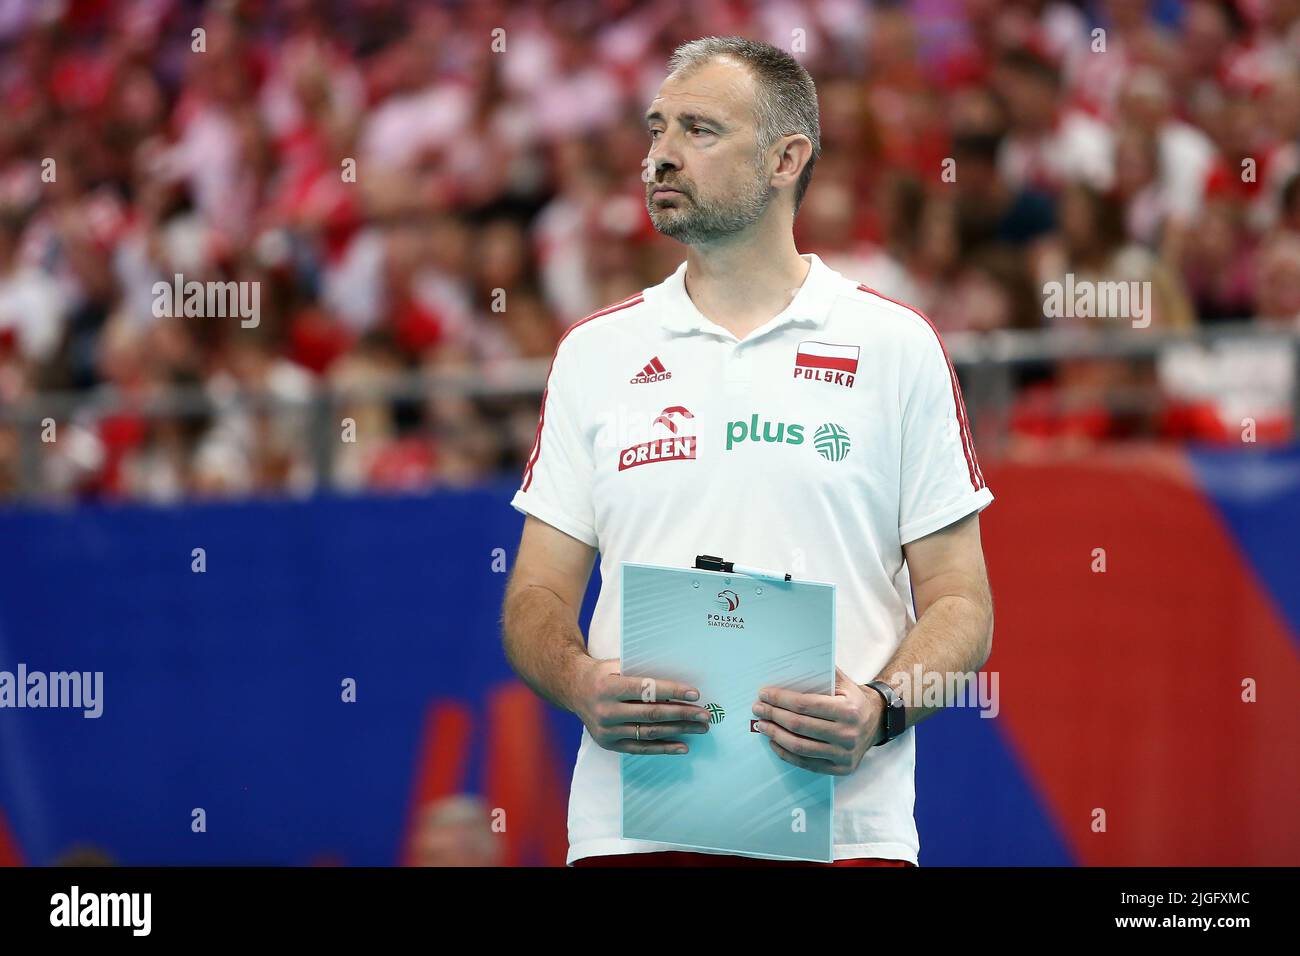 Gdansk, Poland. 10th July, 2022. Nikola Grbic head coach of Poland during the 2022 men's FIVB Volleyball Nations League match between Poland and Slovenia in Gdansk, Poland, 10 July 2022. Credit: PAP/Alamy Live News Stock Photo